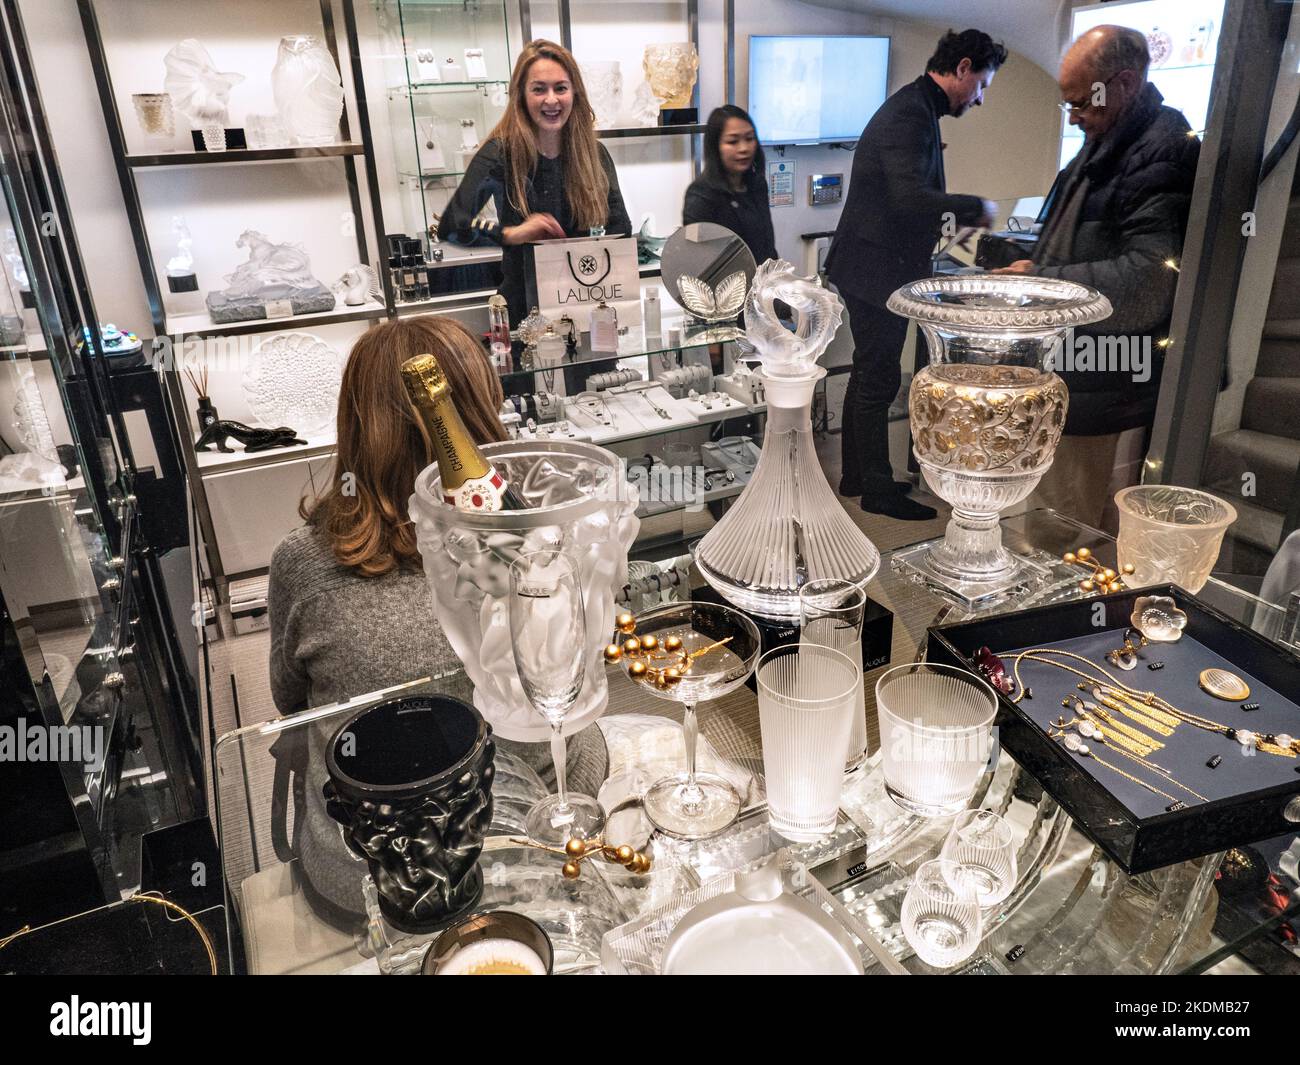 LALIQUE CHRISTMAS LUXURY gift shopping buying with shoppers in Lalique glassware store shop in traditional Burlington Arcade Piccadilly London Stock Photo